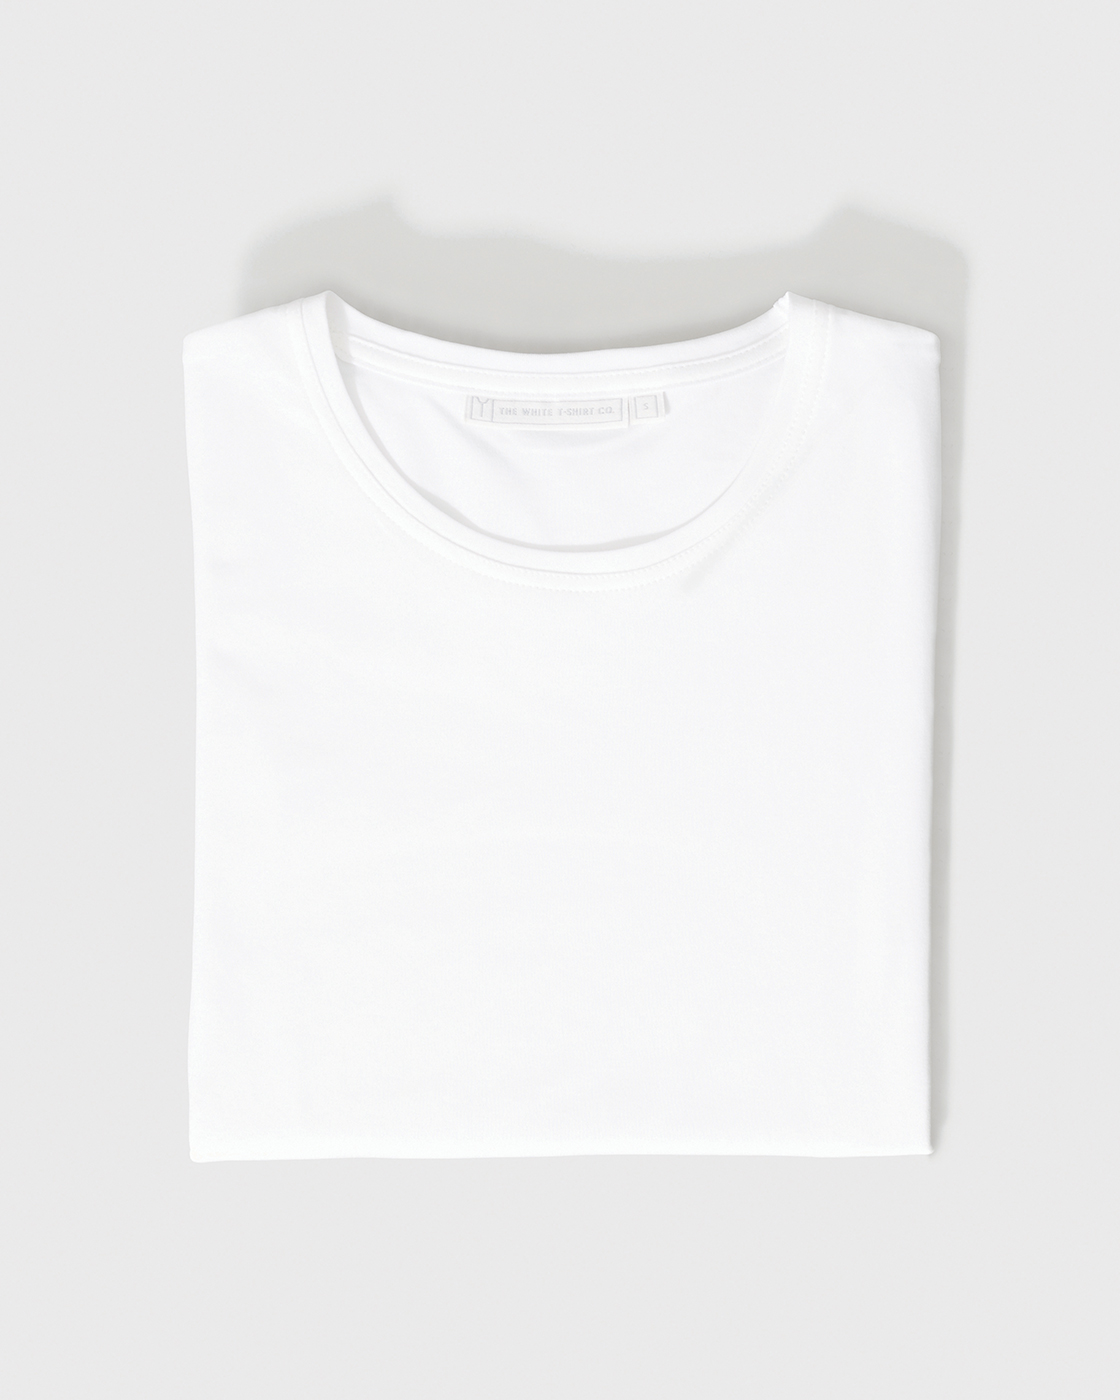 Brand Strategy Brand Values Website The White T Shirt Co